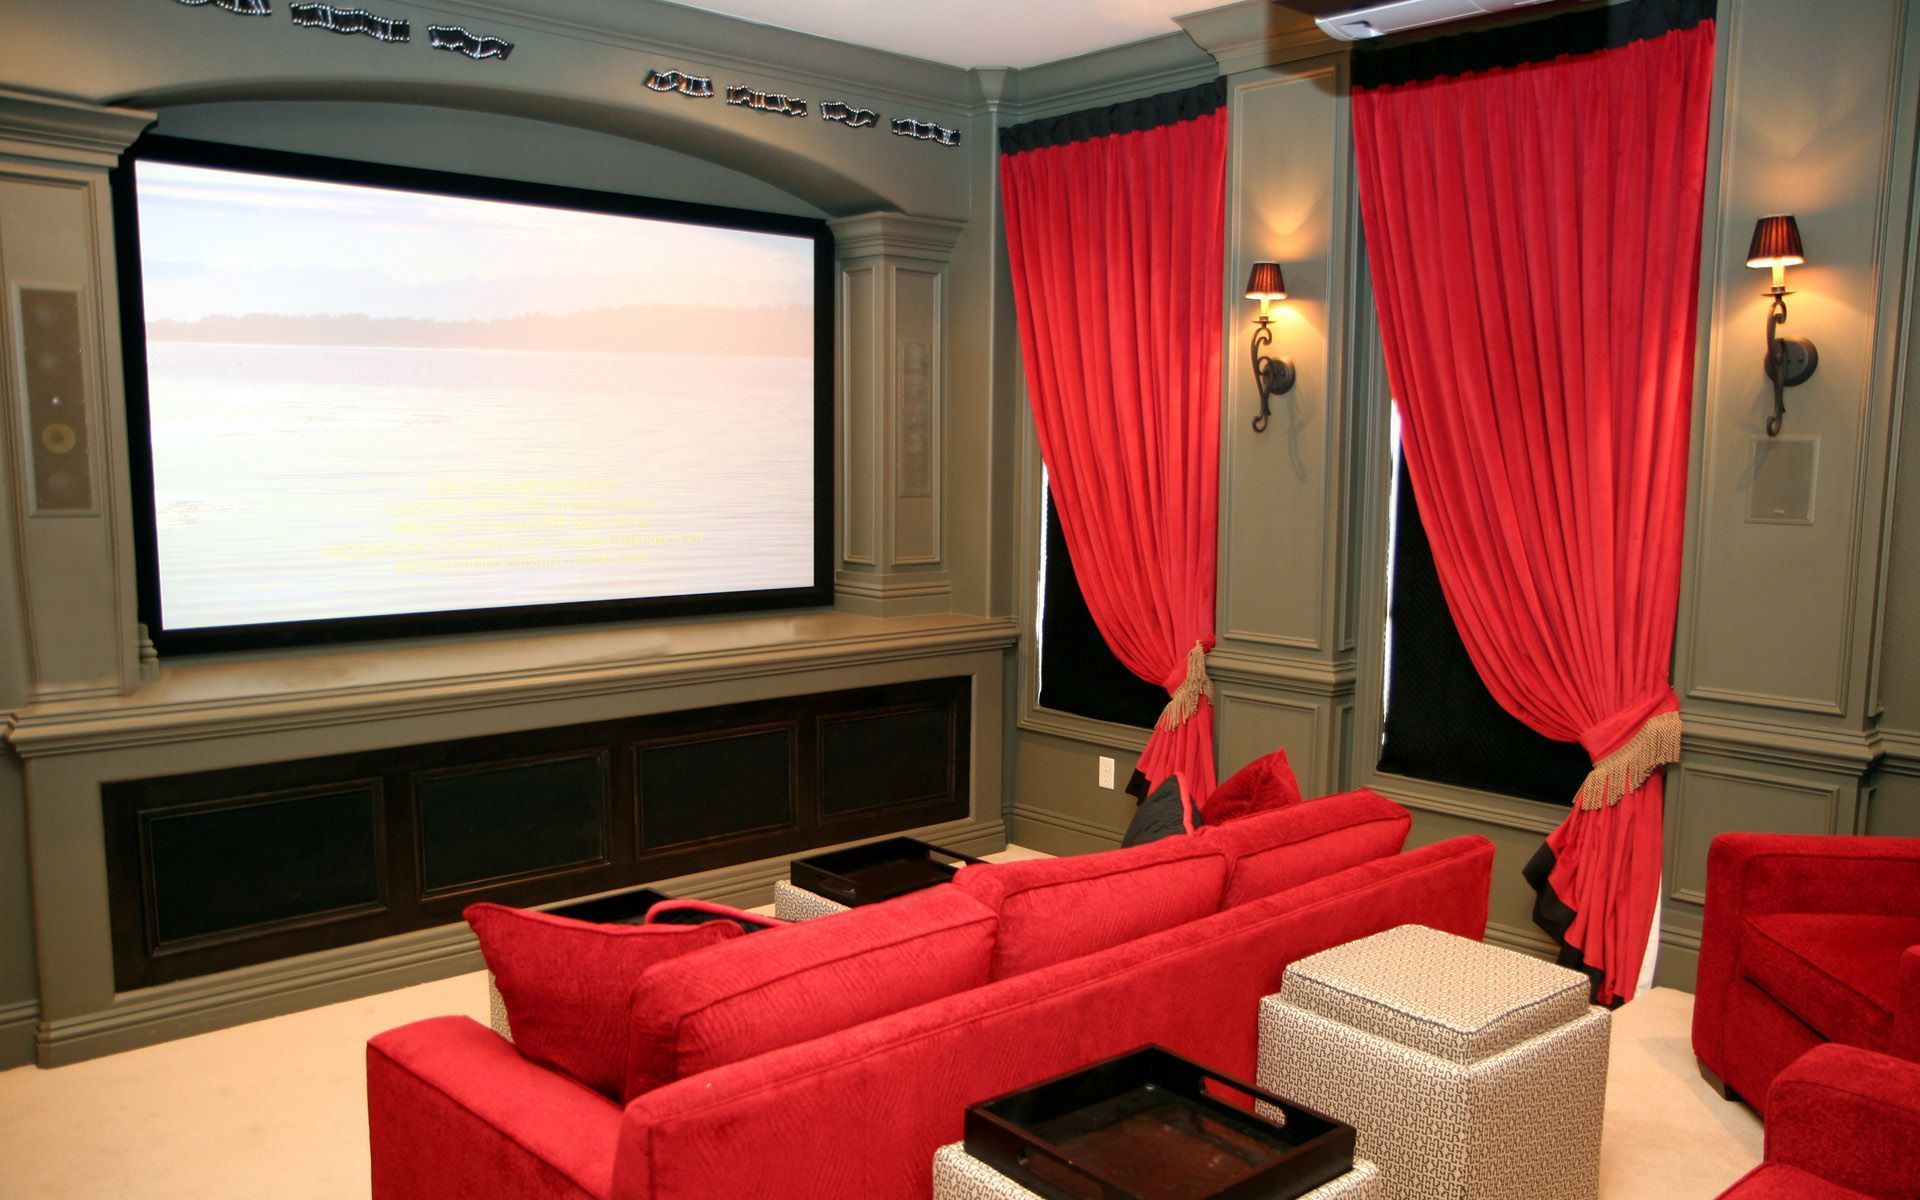 Home Theater wallpapers and images - wallpapers, pictures, photos